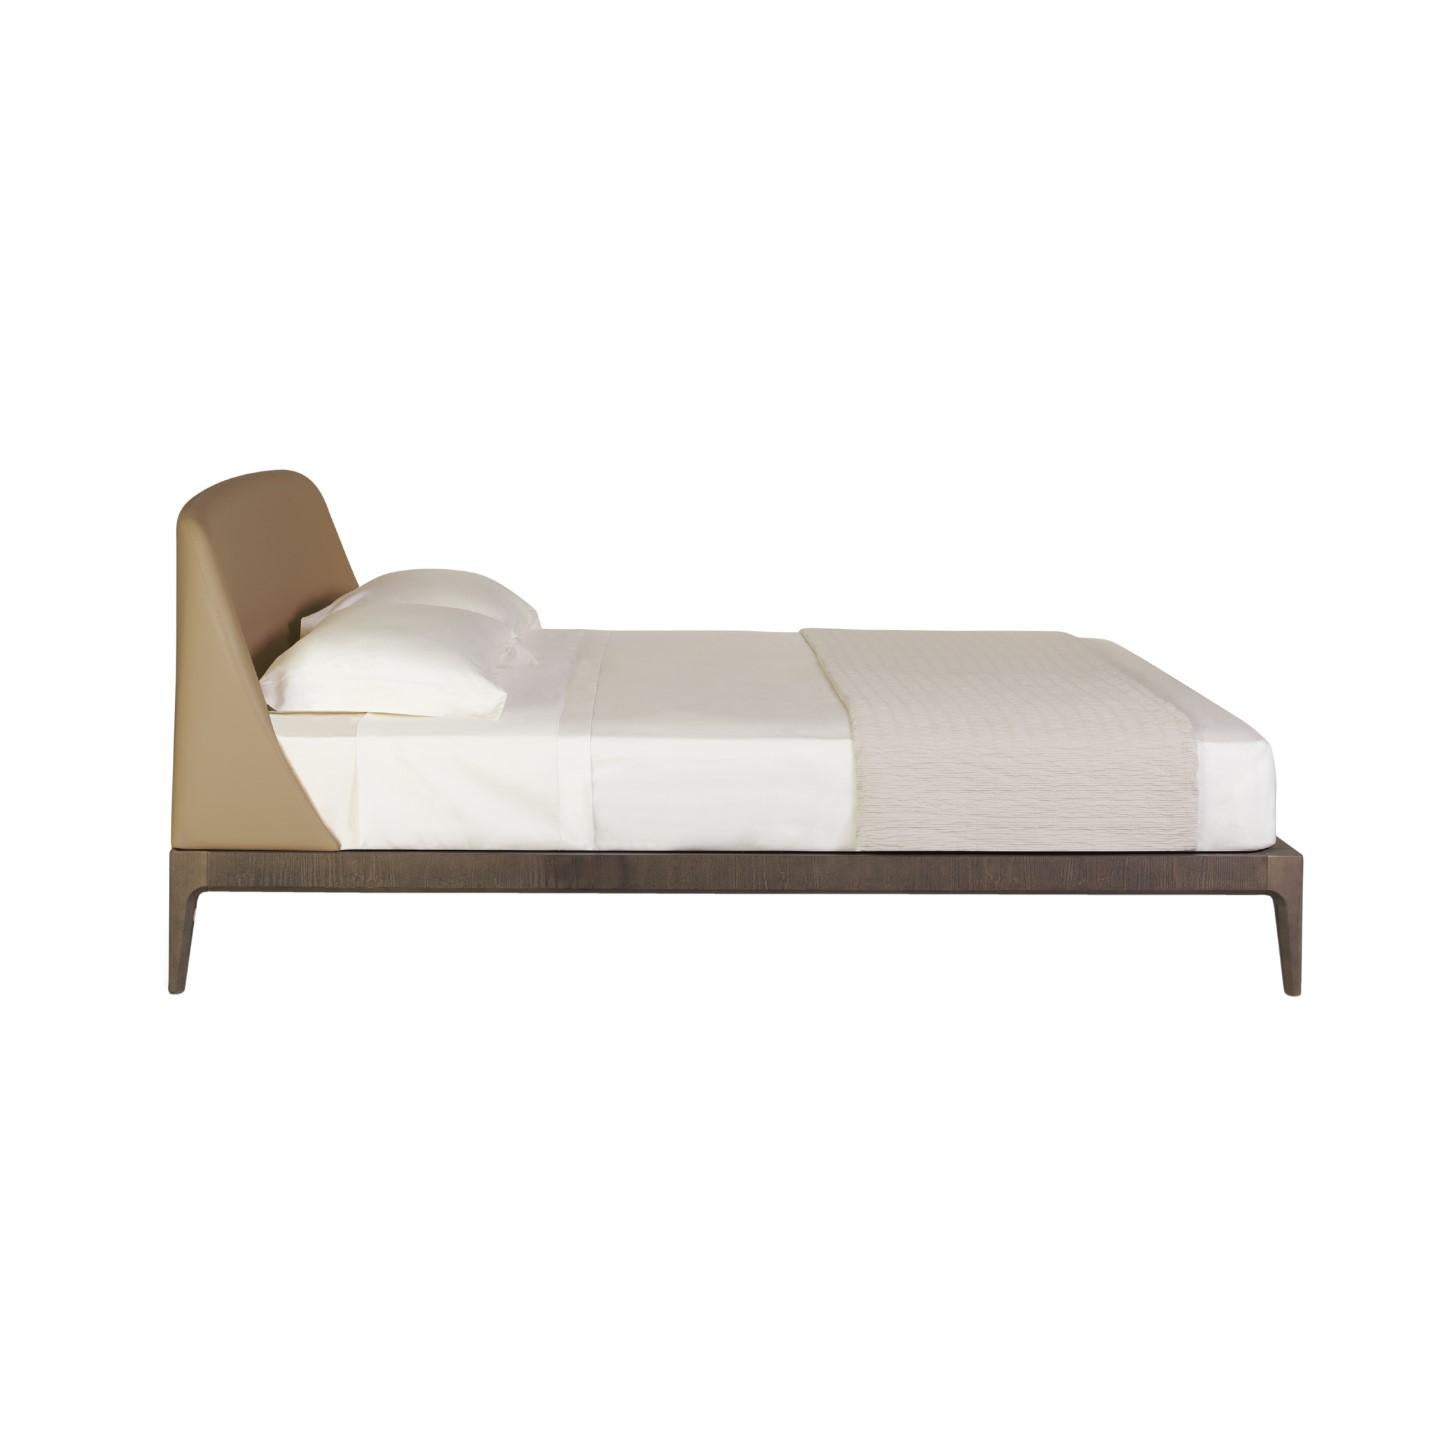 Bellagio contemporary bed made of ashwood with leather or fabric upholstered headboard.
Available in different mattress sizes:
Headboard upholstered with leather, fabric, velvet or COM
Wooden slats mattress support included.
Designed by Libero